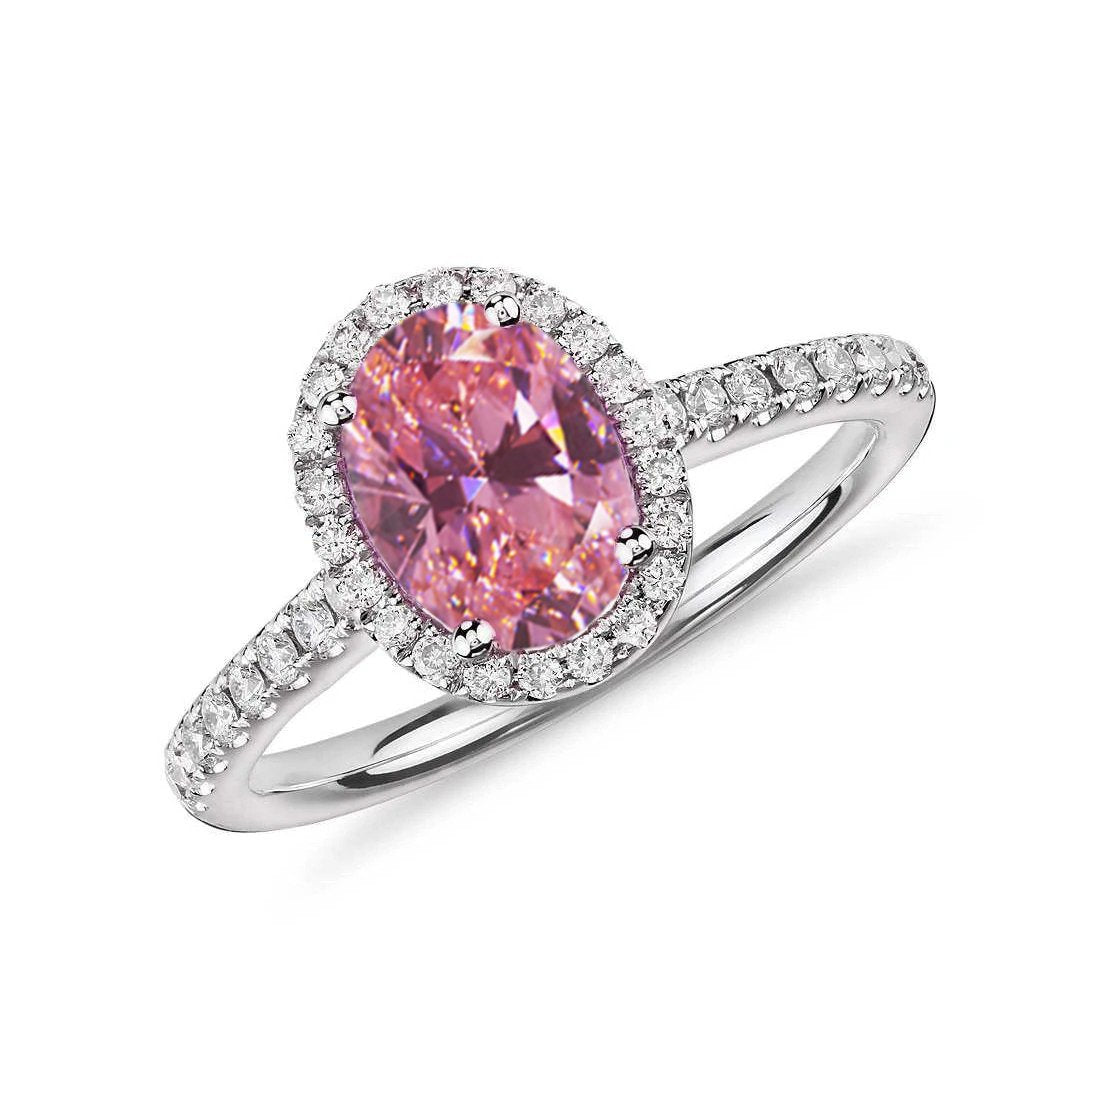 Bague Saphir Rose Taille Ovale & Diamants Ronds 2.25 Ct Or Blanc 14K - HarryChadEnt.FR